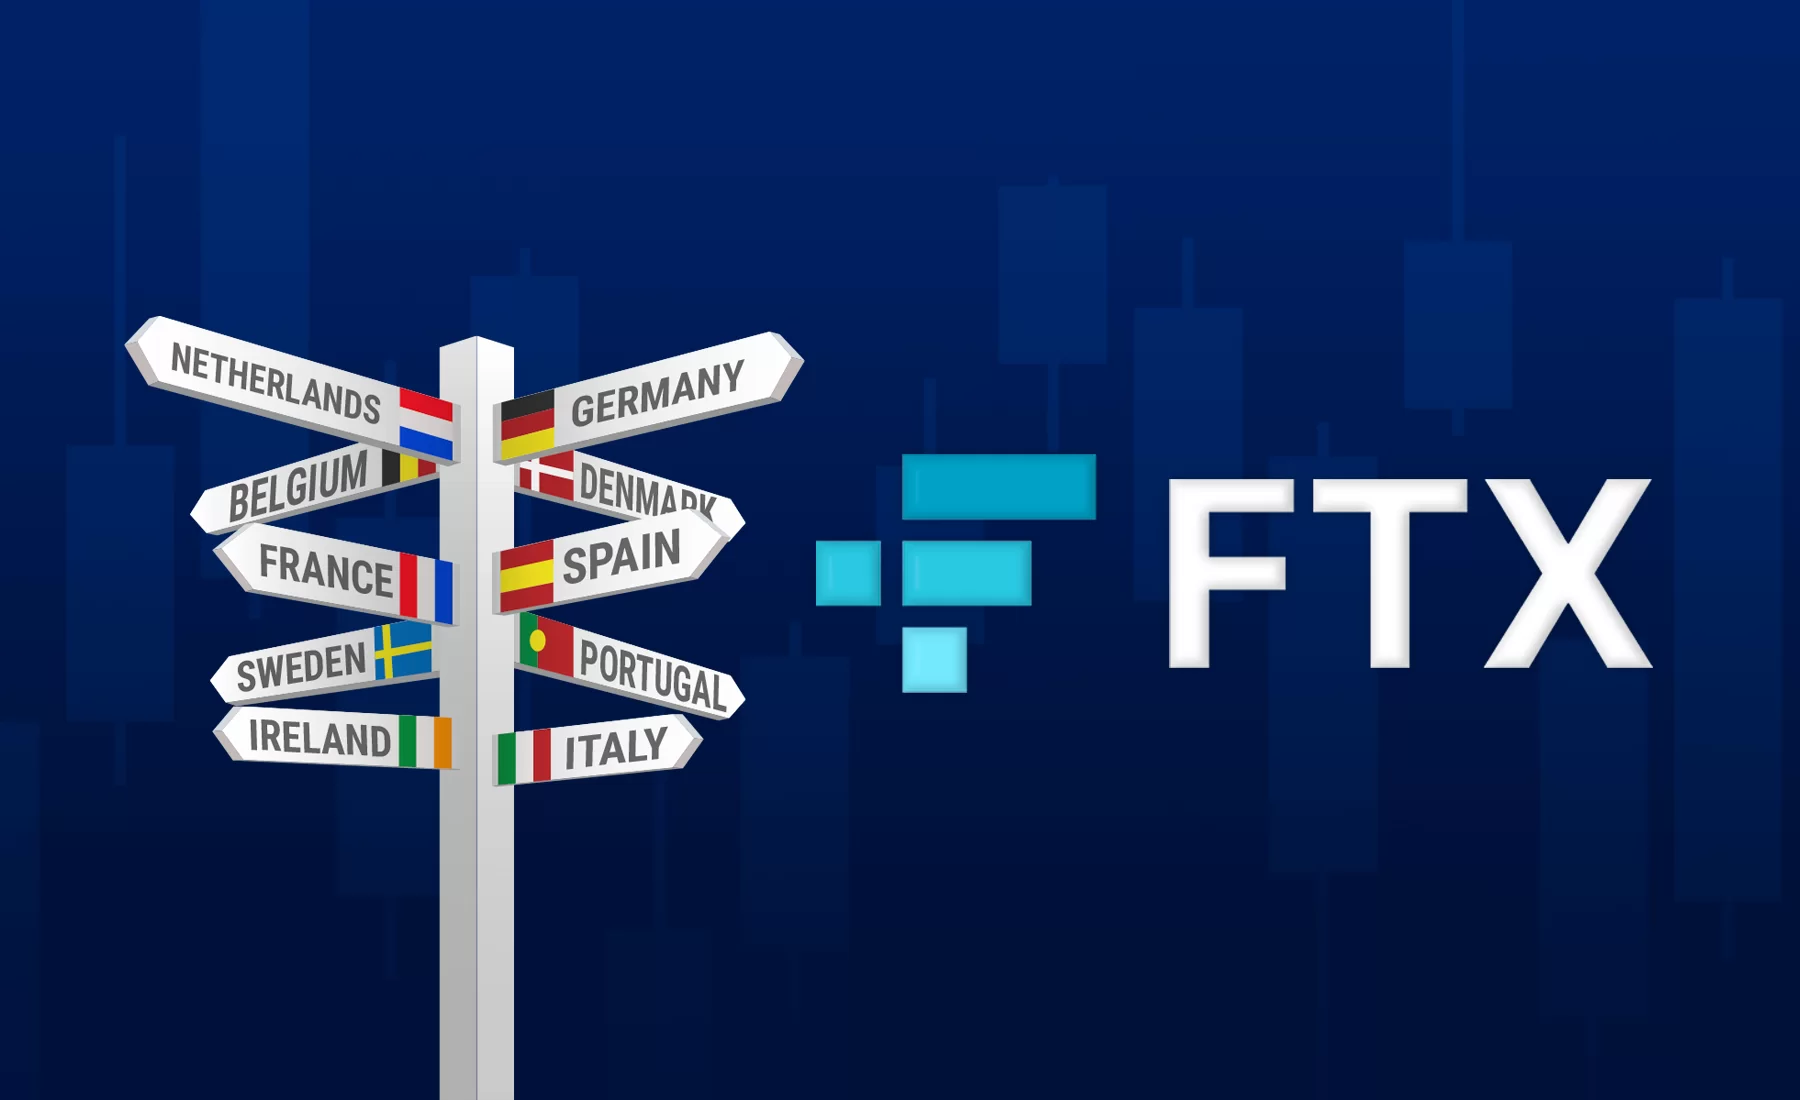 FTX Europe Becomes Dubai's First Licensed Crypto Exchange